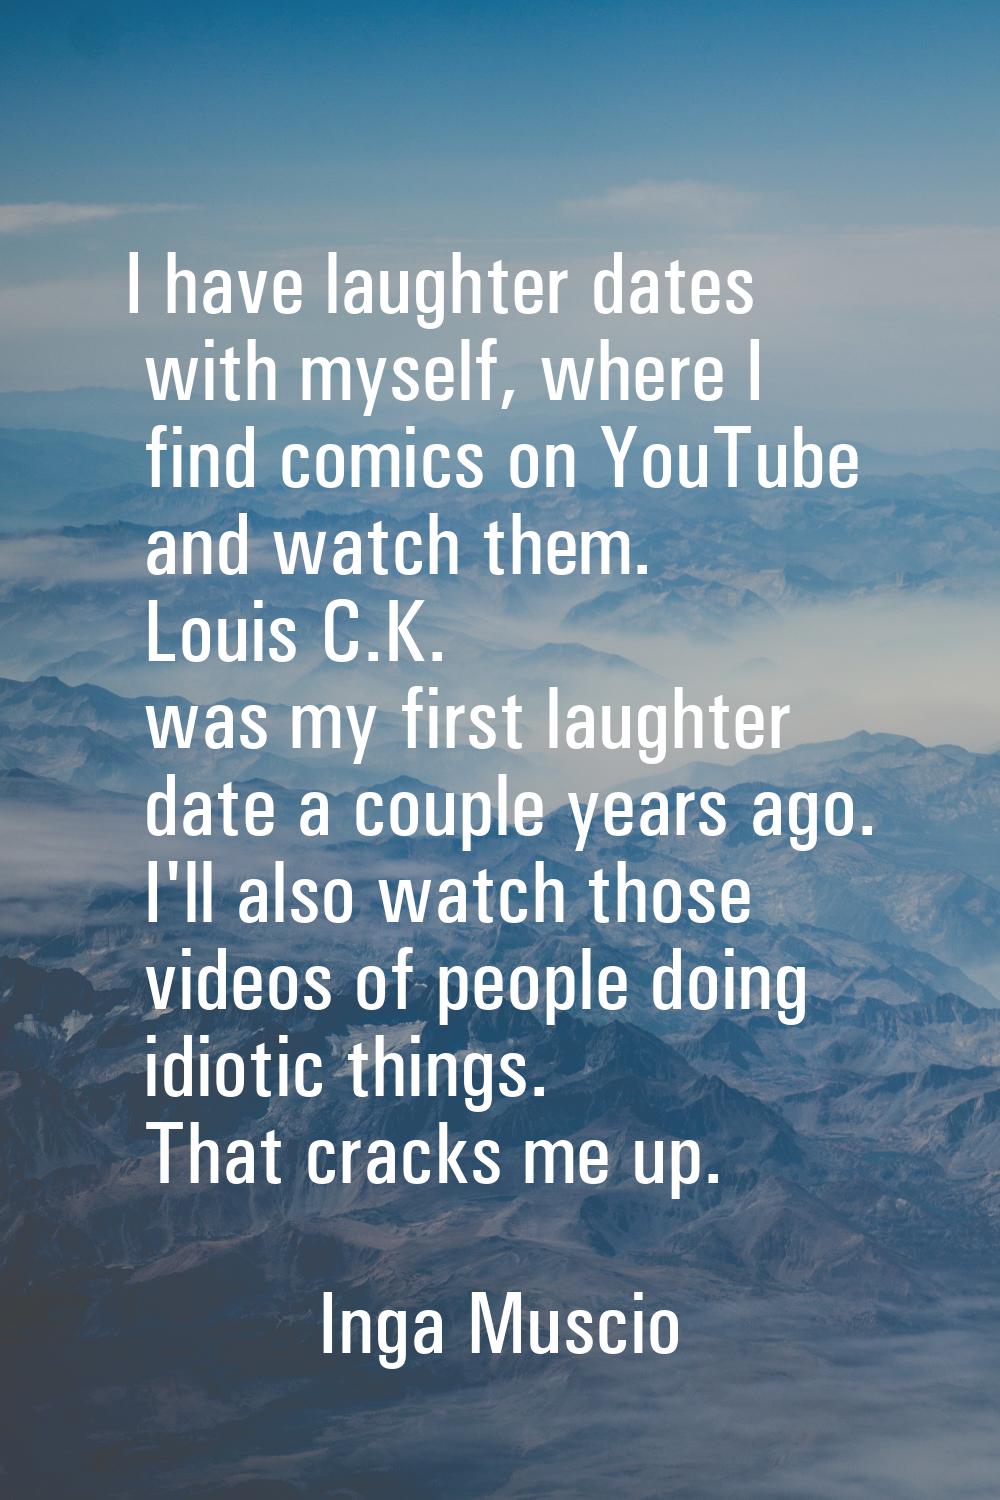 I have laughter dates with myself, where I find comics on YouTube and watch them. Louis C.K. was my